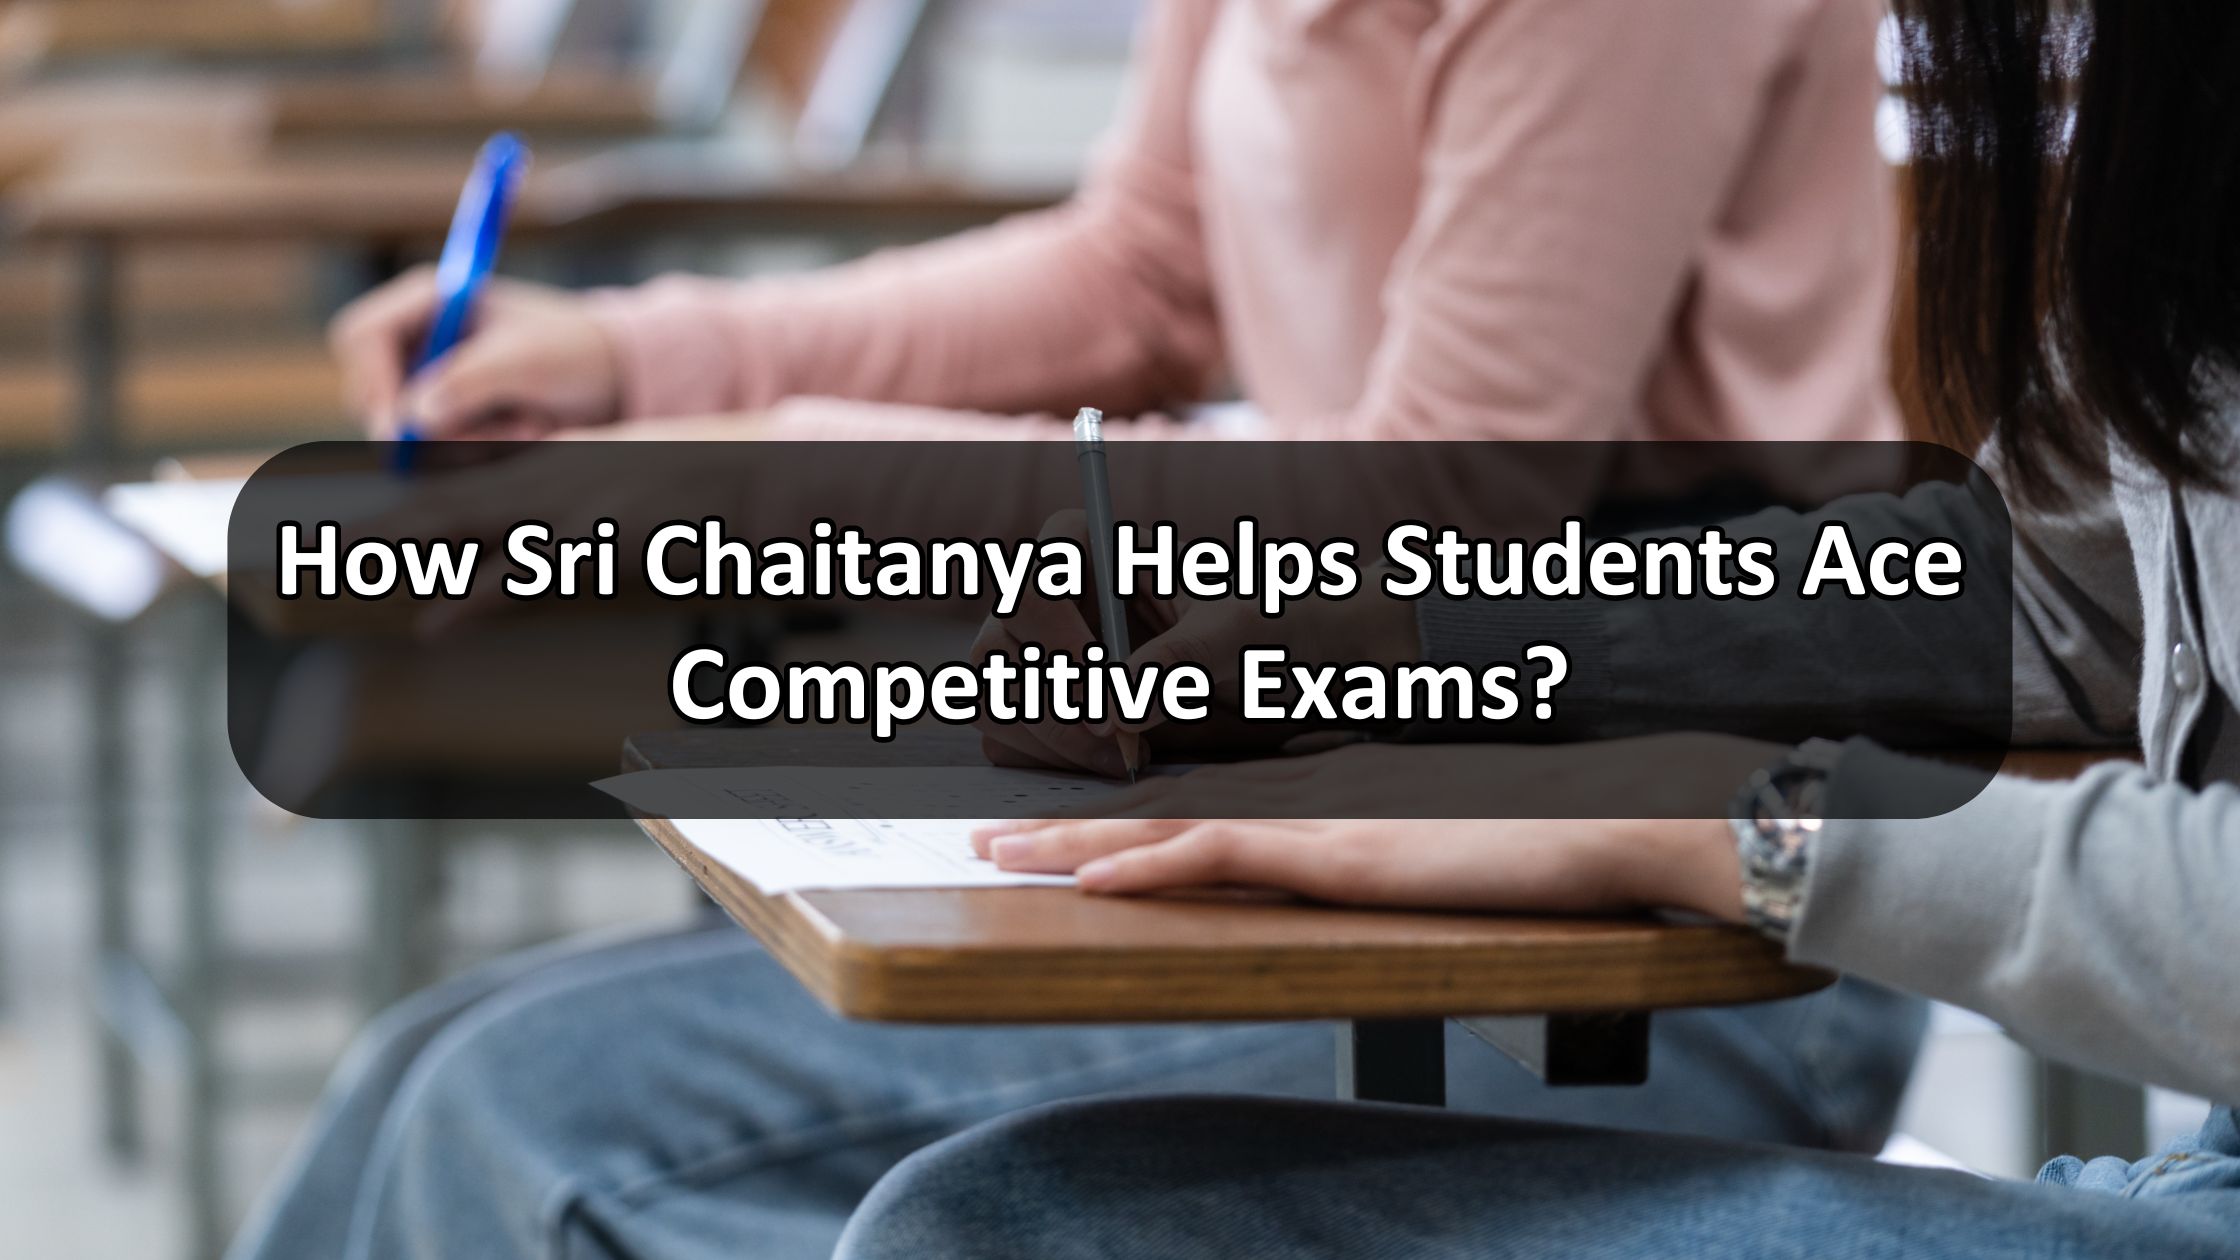 How Sri Chaitanya Helps Students Ace Competitive Exams?